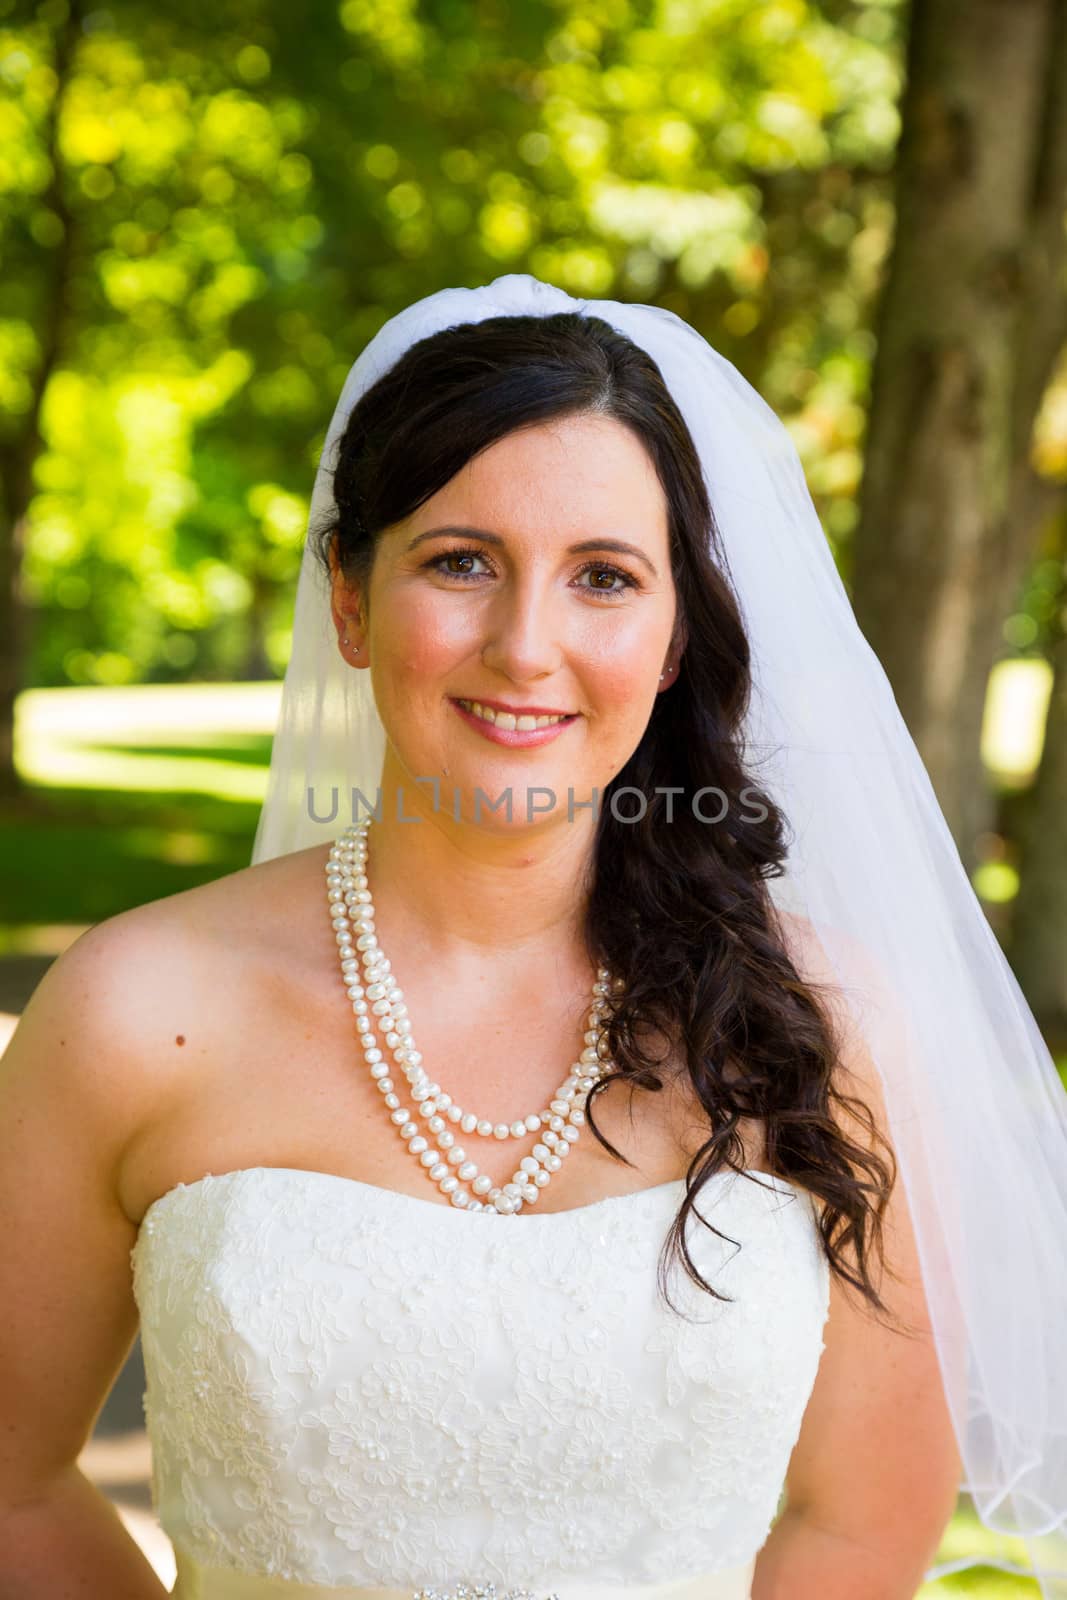 A bride poses for some portraits while wearing her wedding dress at a park outdoors just before here wedding ceremony.